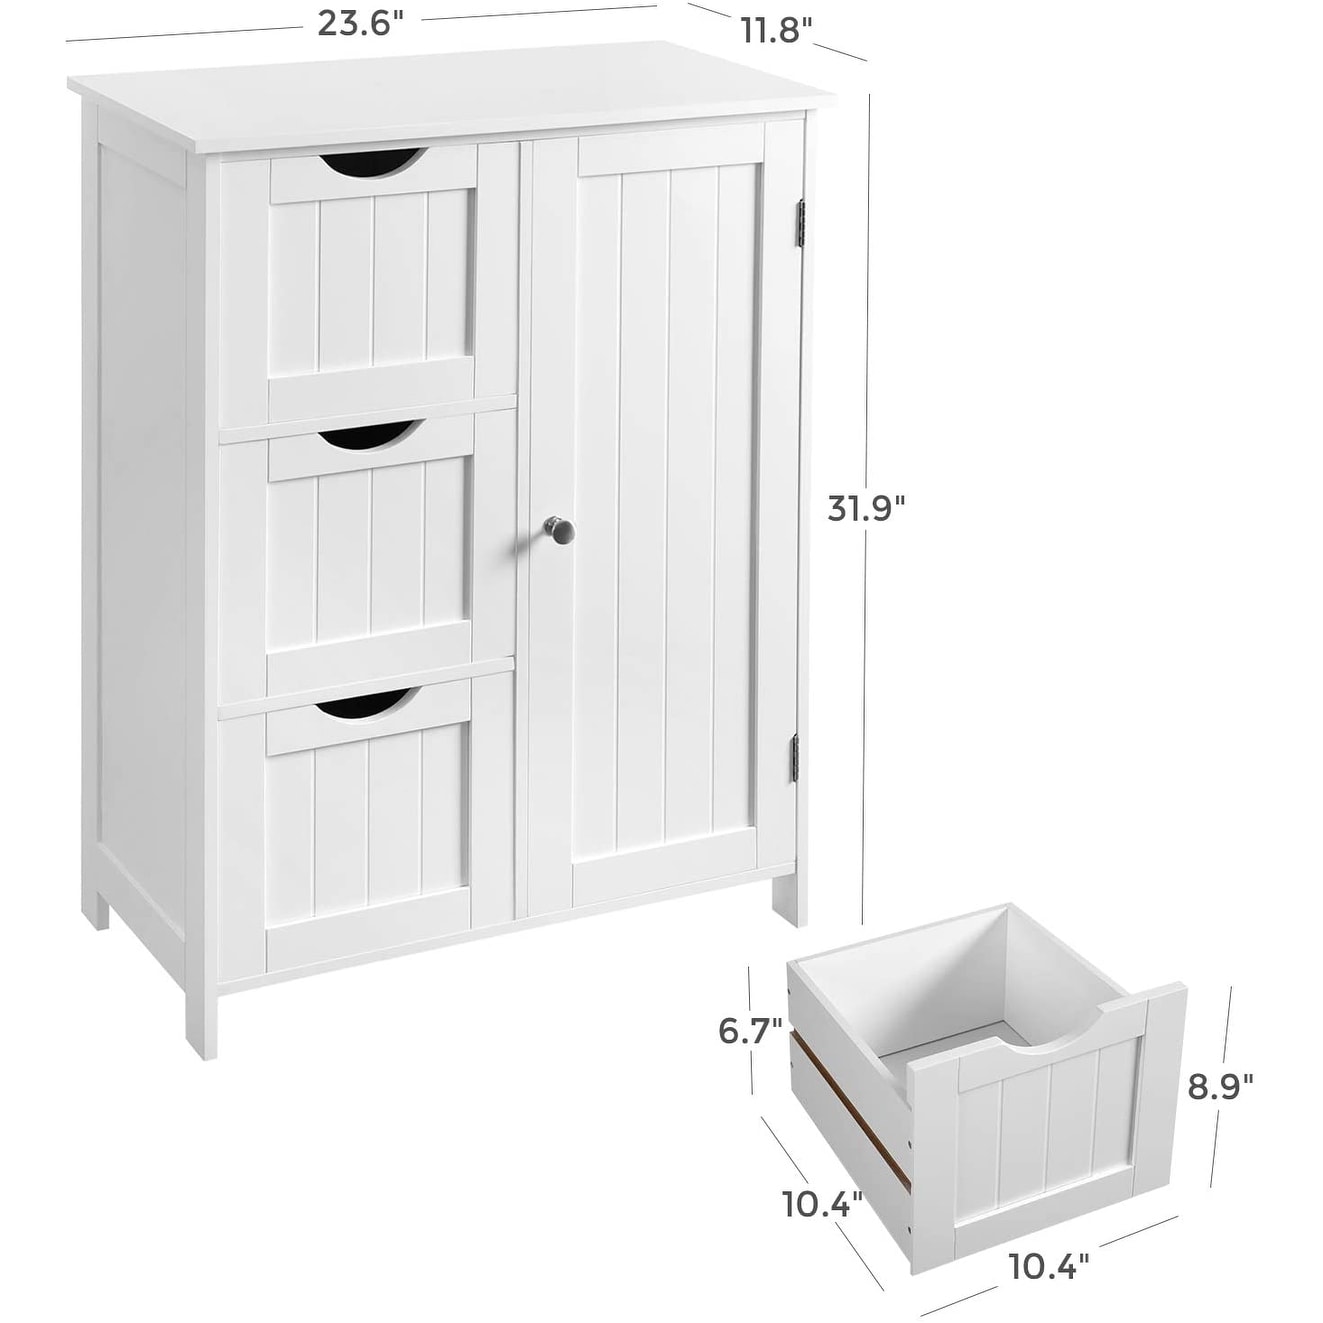 https://ak1.ostkcdn.com/images/products/is/images/direct/b6405857f7a0702b3507e5b20cbff746af7a324c/Bathroom-Storage-Cabinet%2C-White-Floor-Cabinet-with-3-Large-Drawers-and-1-Adjustable-Shelf.jpg